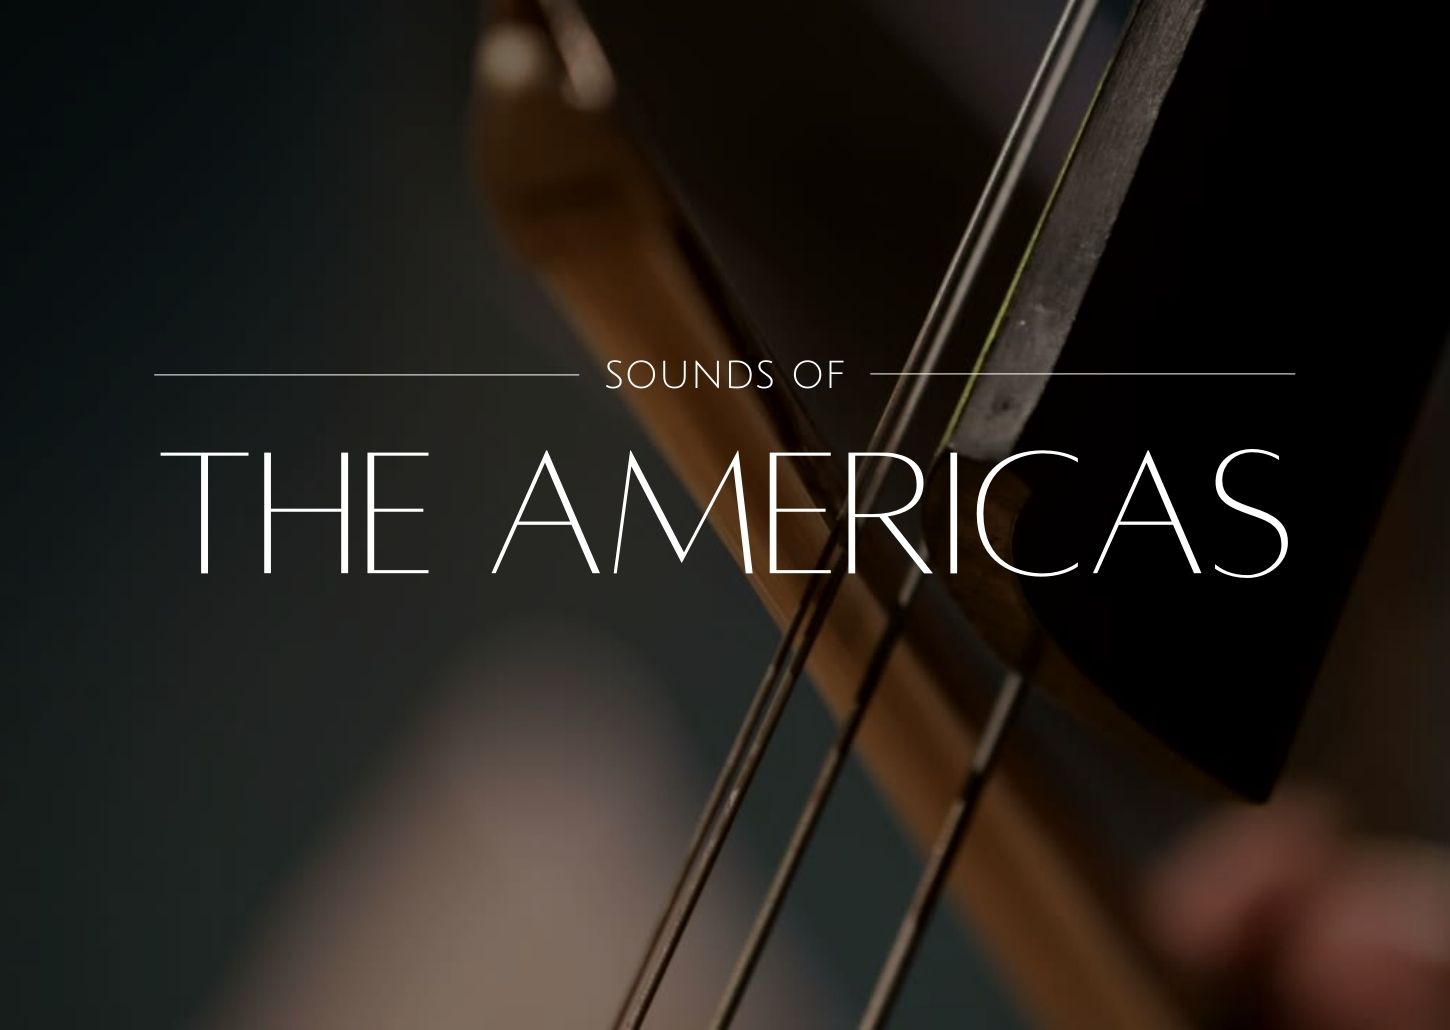 Sounds of the Americas